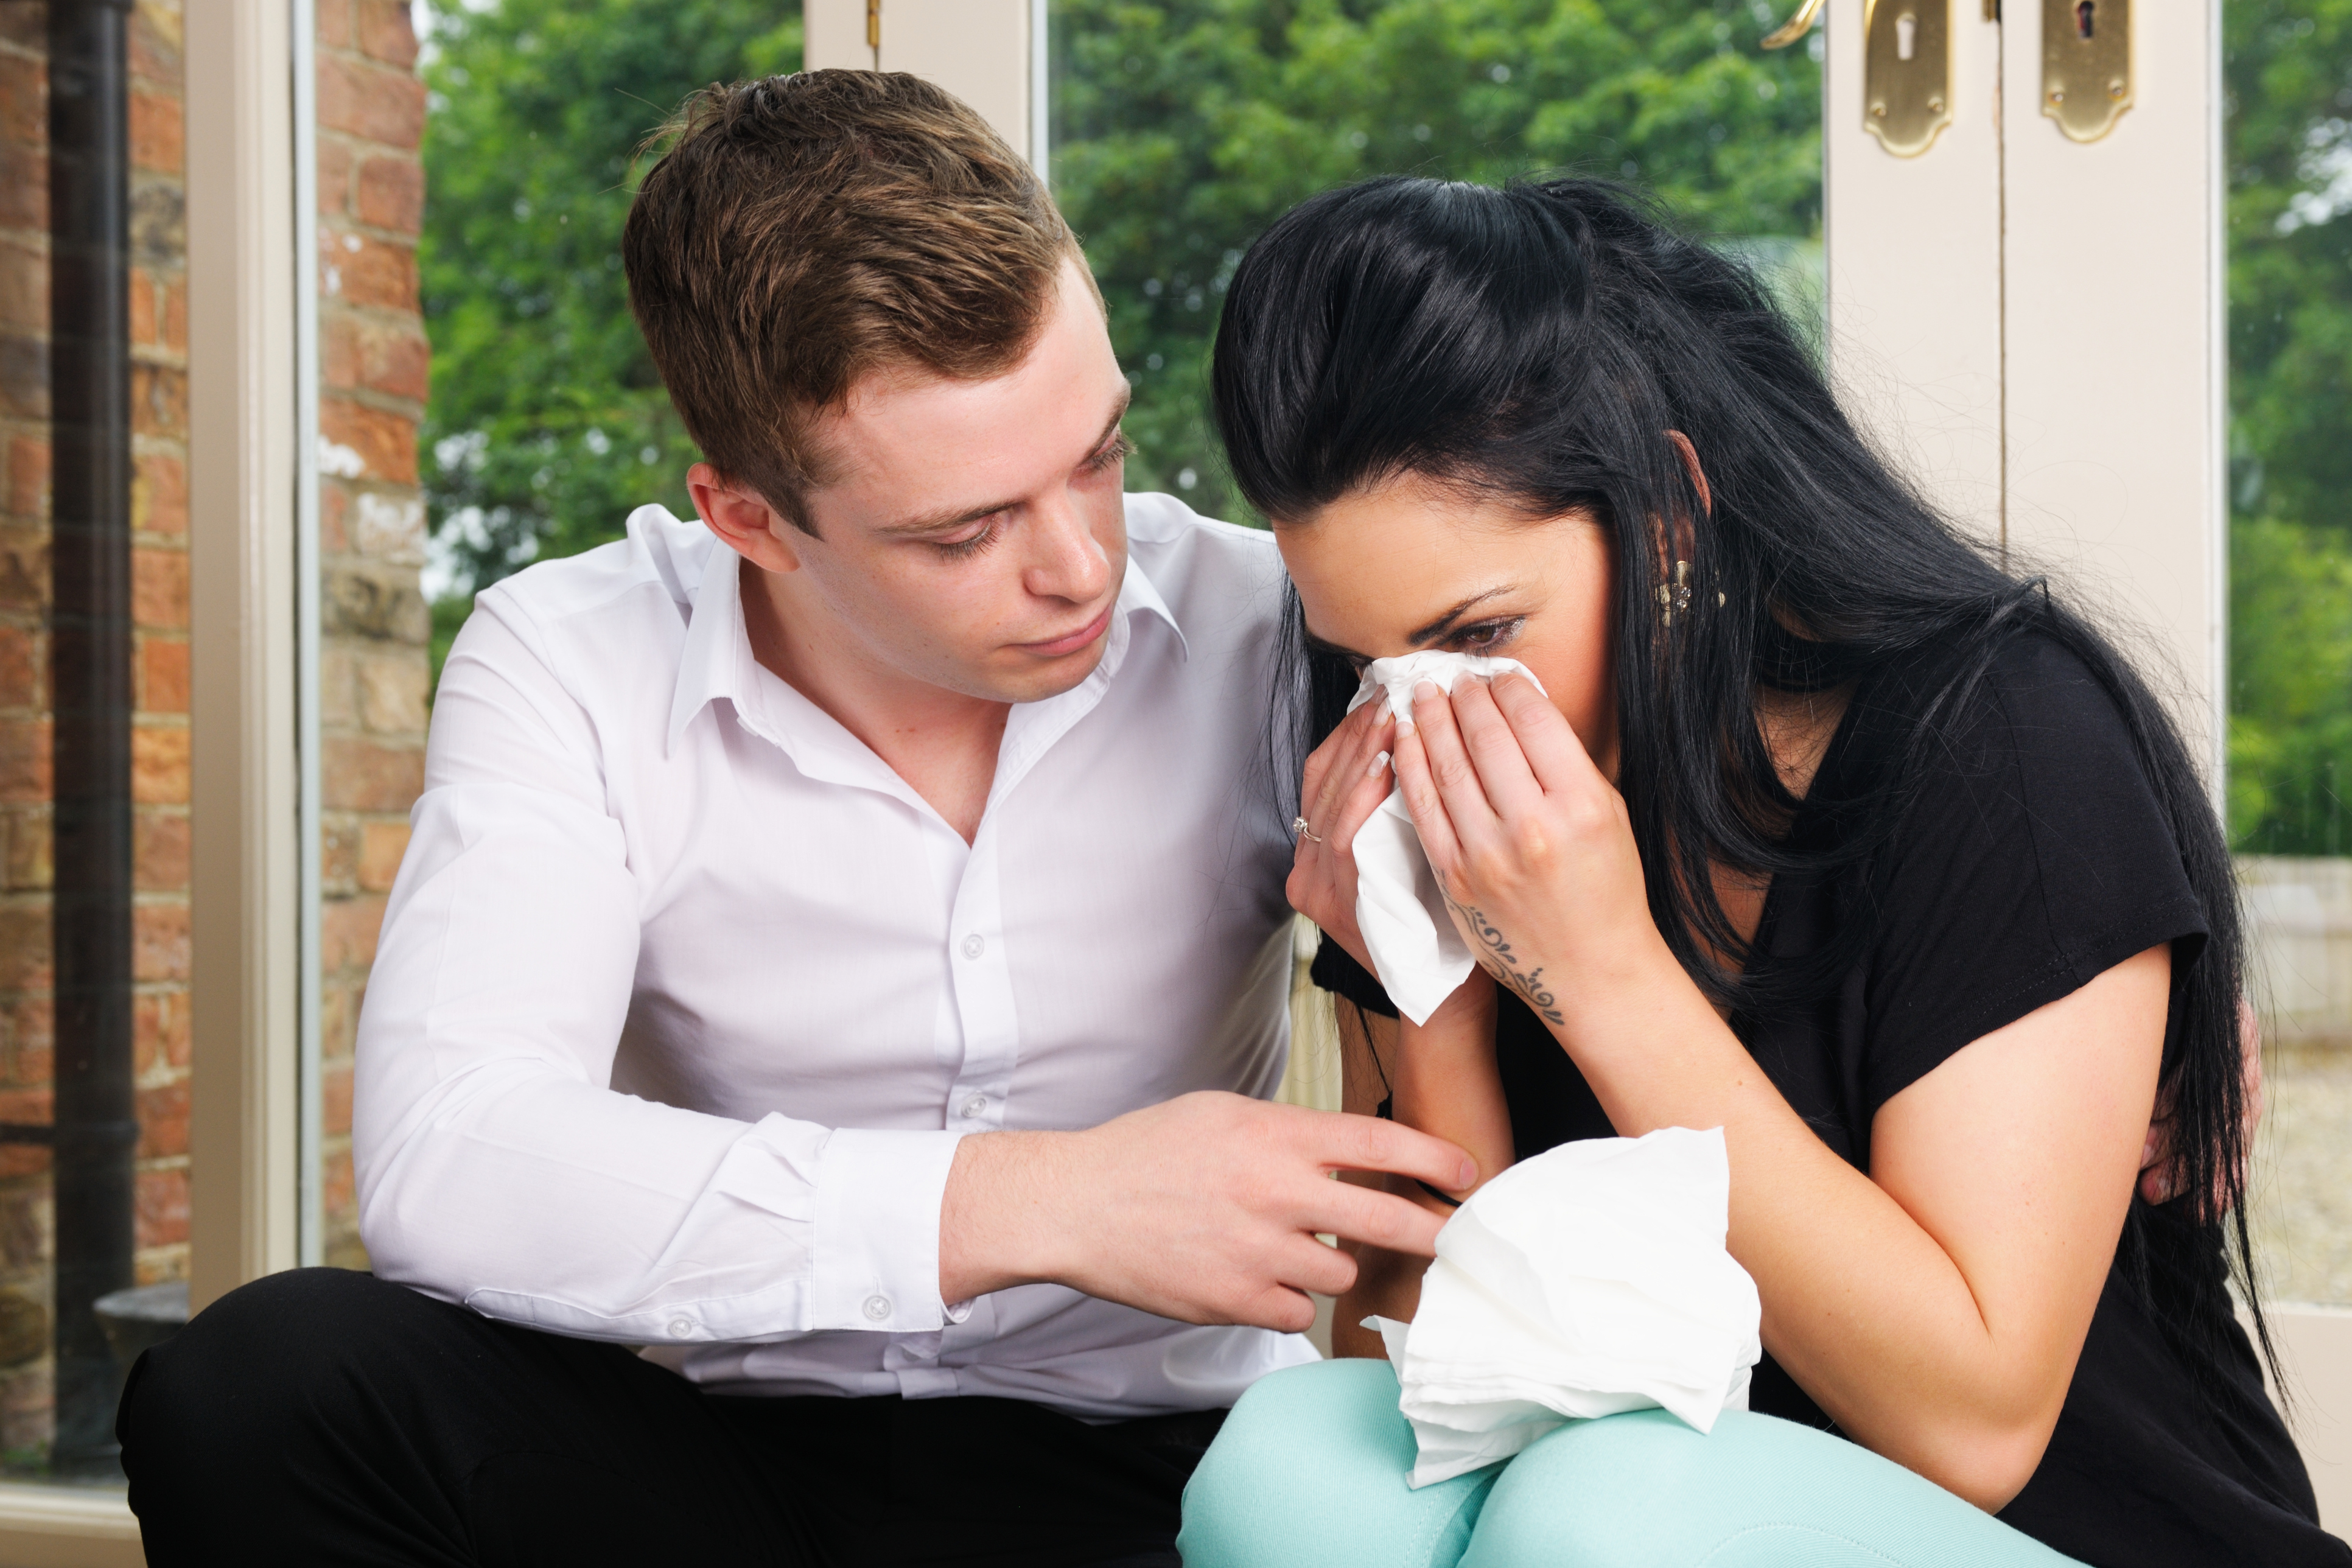 What To Do When Your Girlfriend Cries And You Are At A Loss?